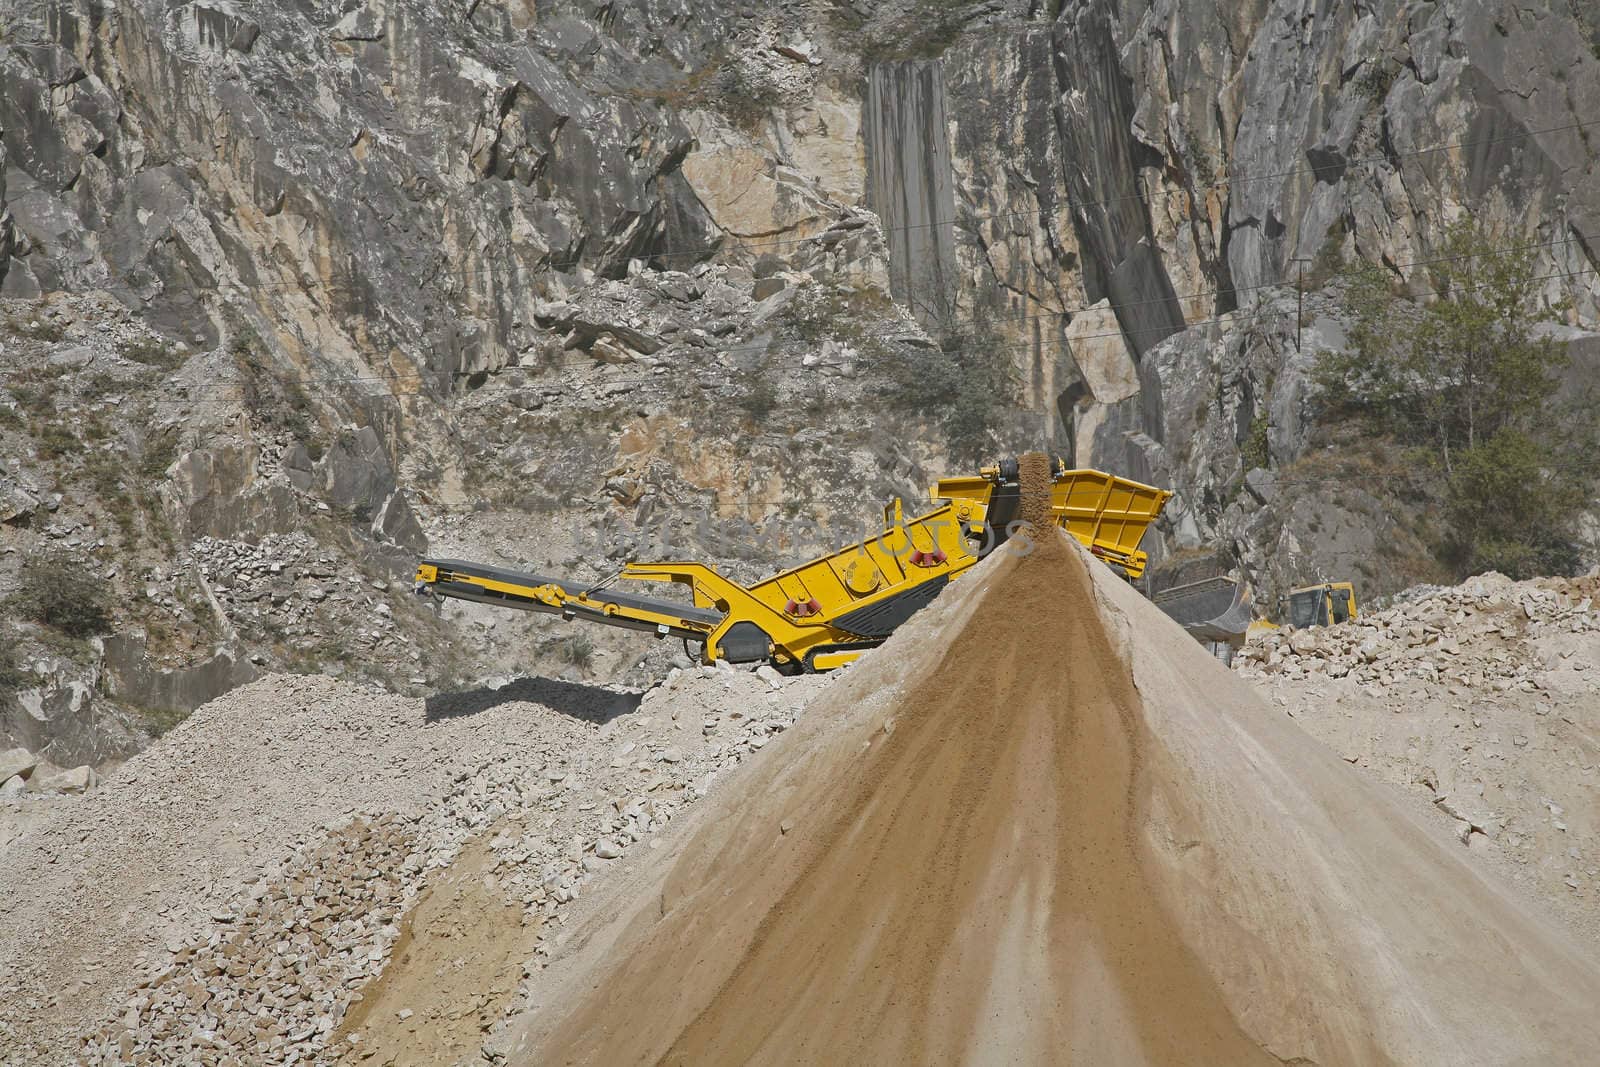 Machine crushing small pieces of marble to road materials in the mountains near the Italian city Carrara